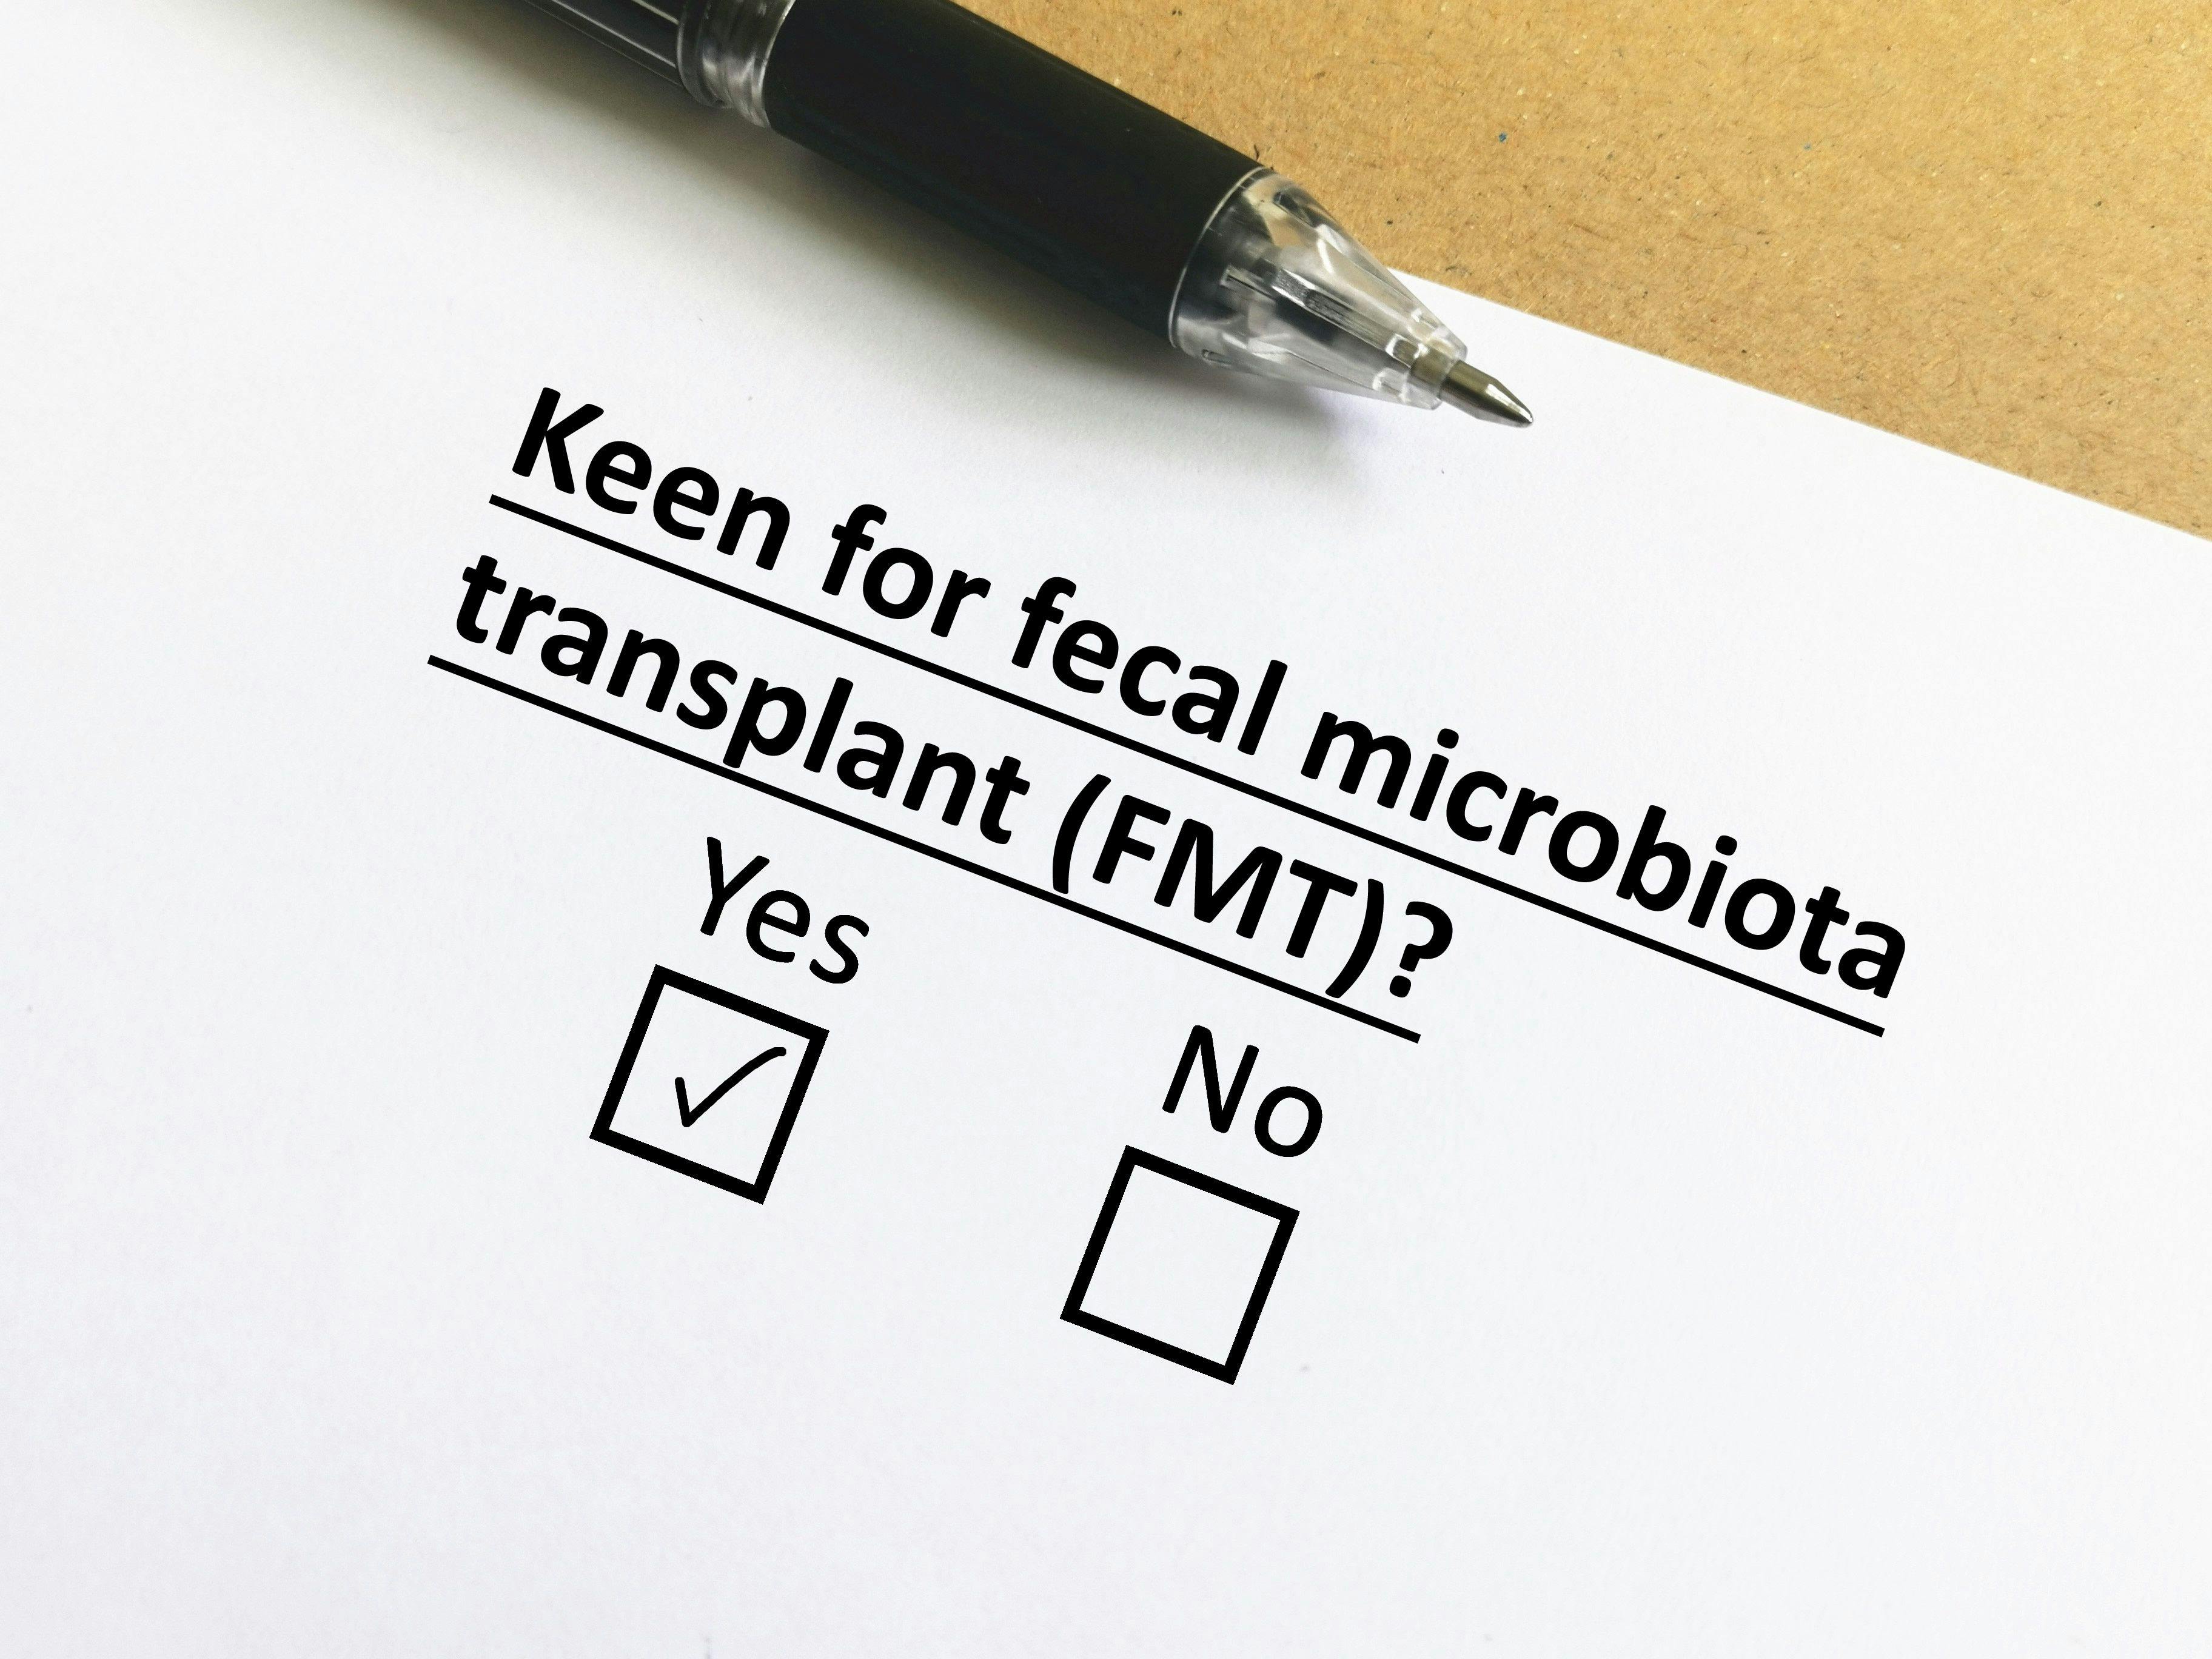 What Makes Fecal Microbiota Transplant an Effective C Difficile Cure?